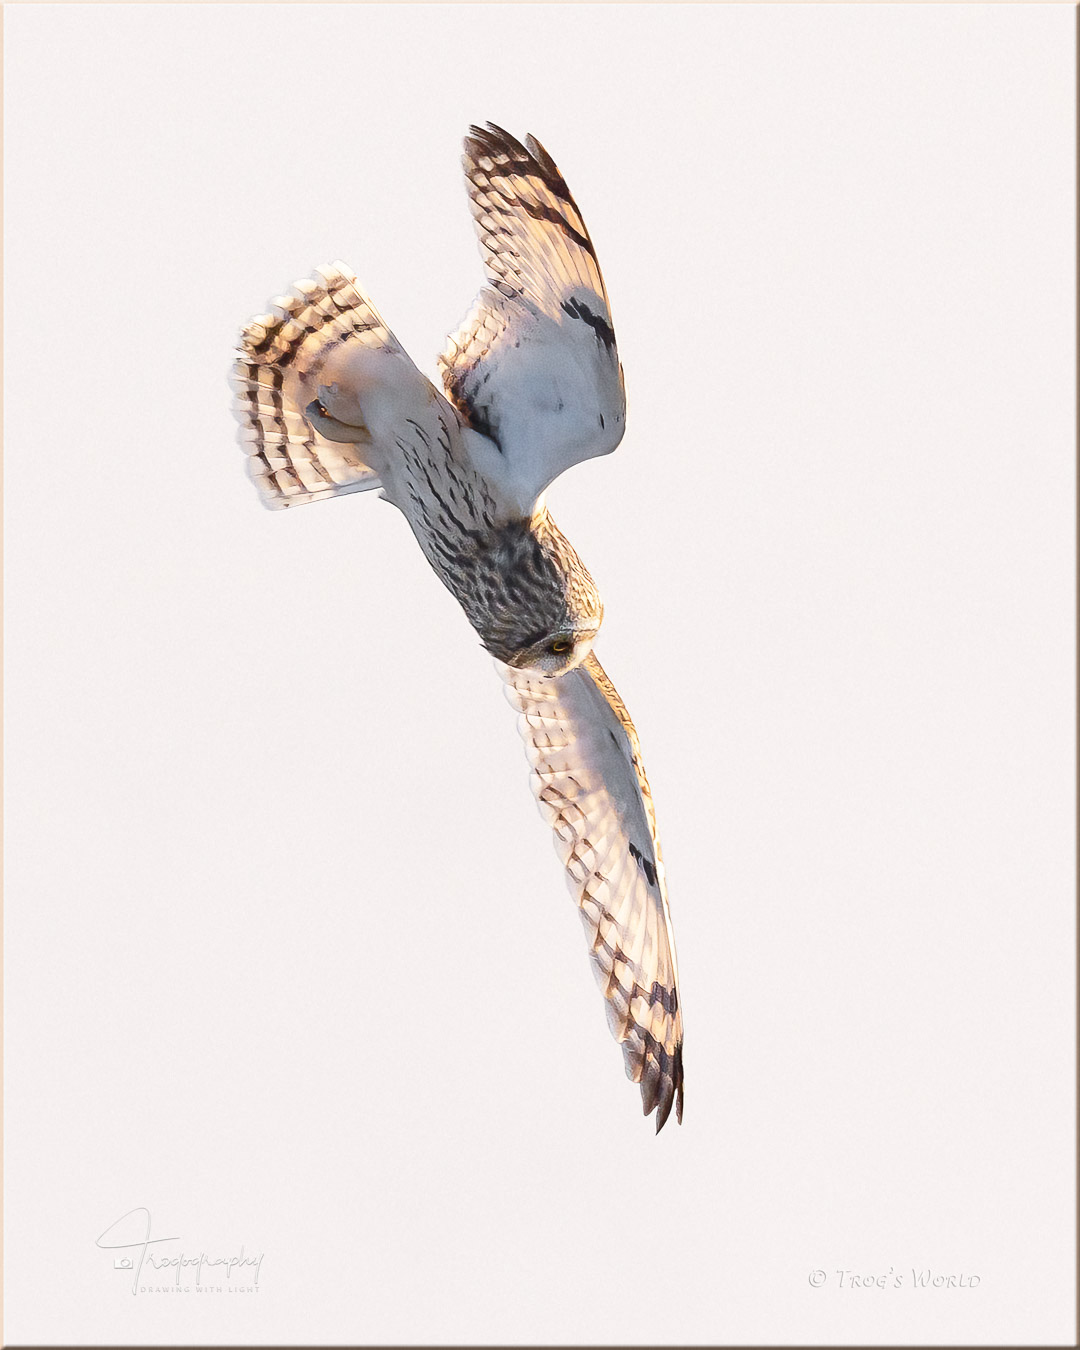 Short-eared Owl dives for a vole